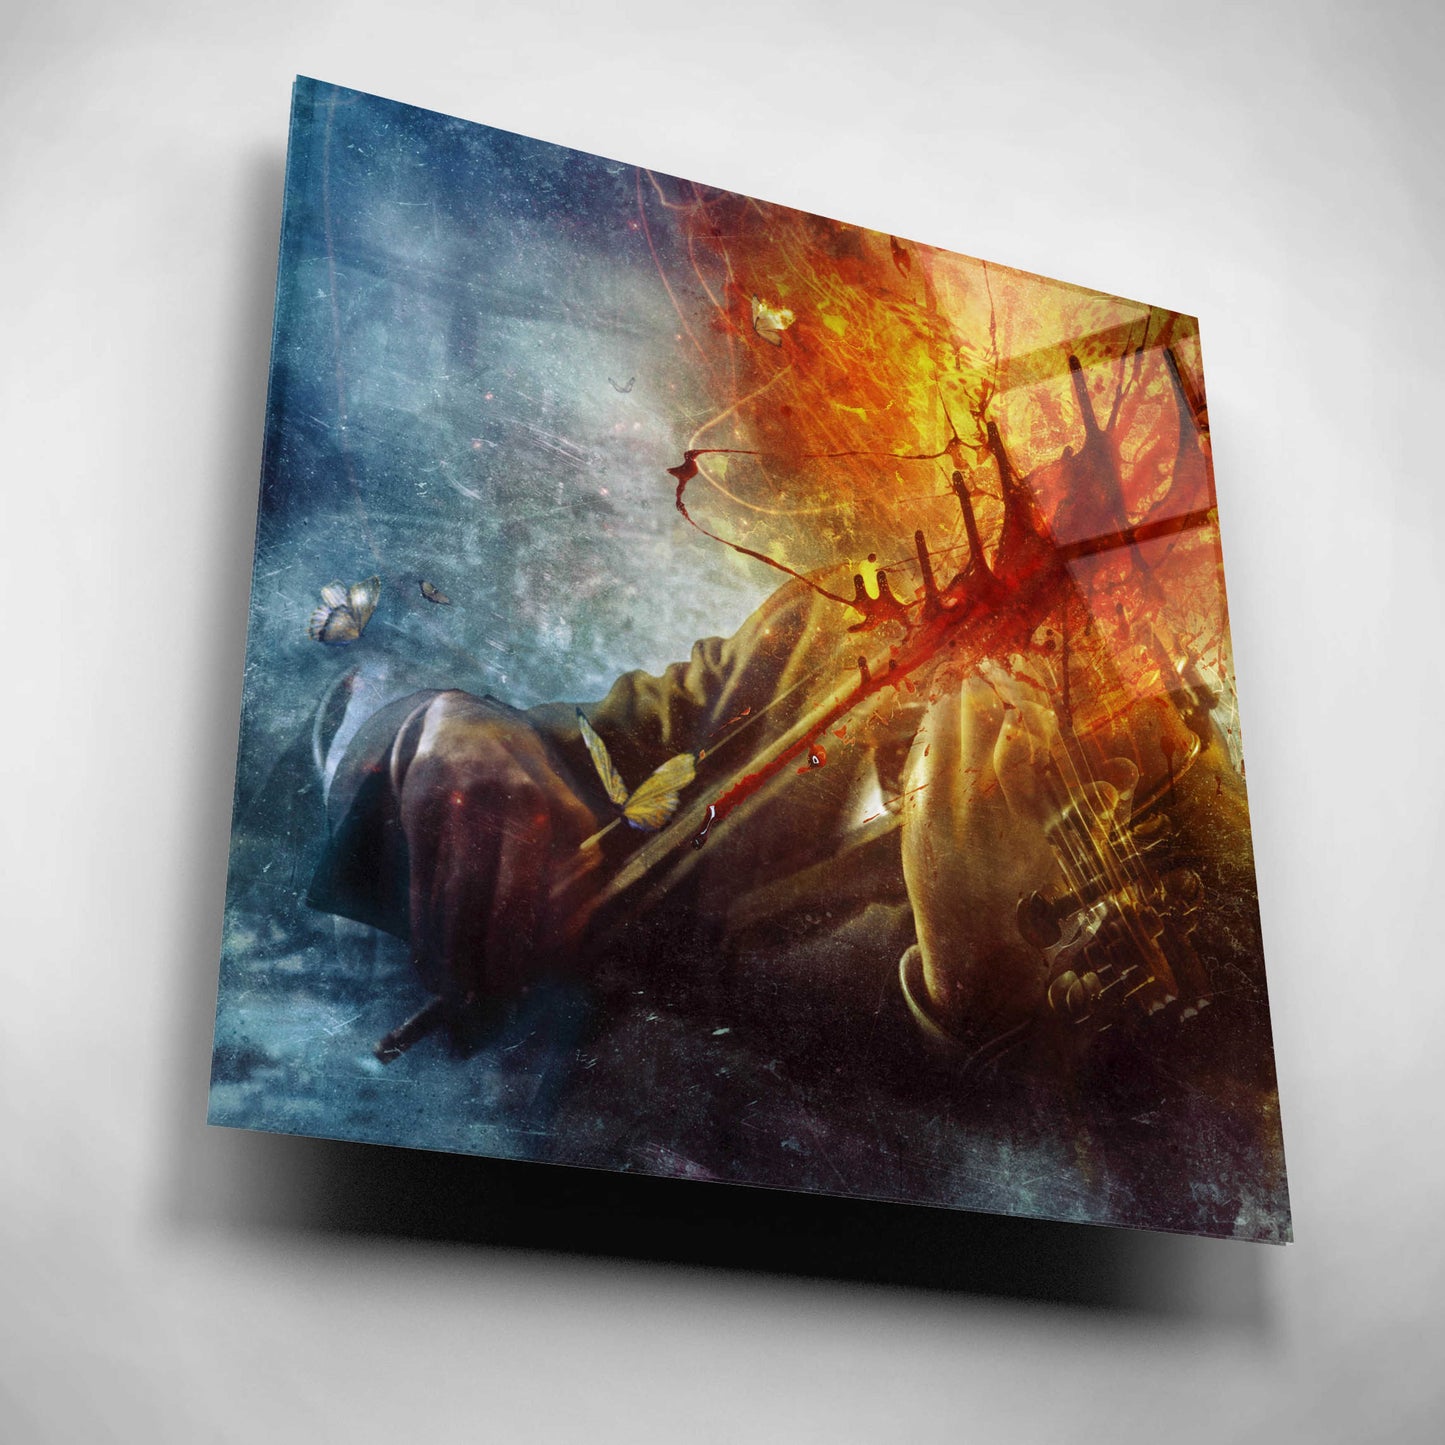 Epic Art 'A Look Into The Abyss' by Mario Sanchez Nevado, Acrylic Glass Wall Art,12x12